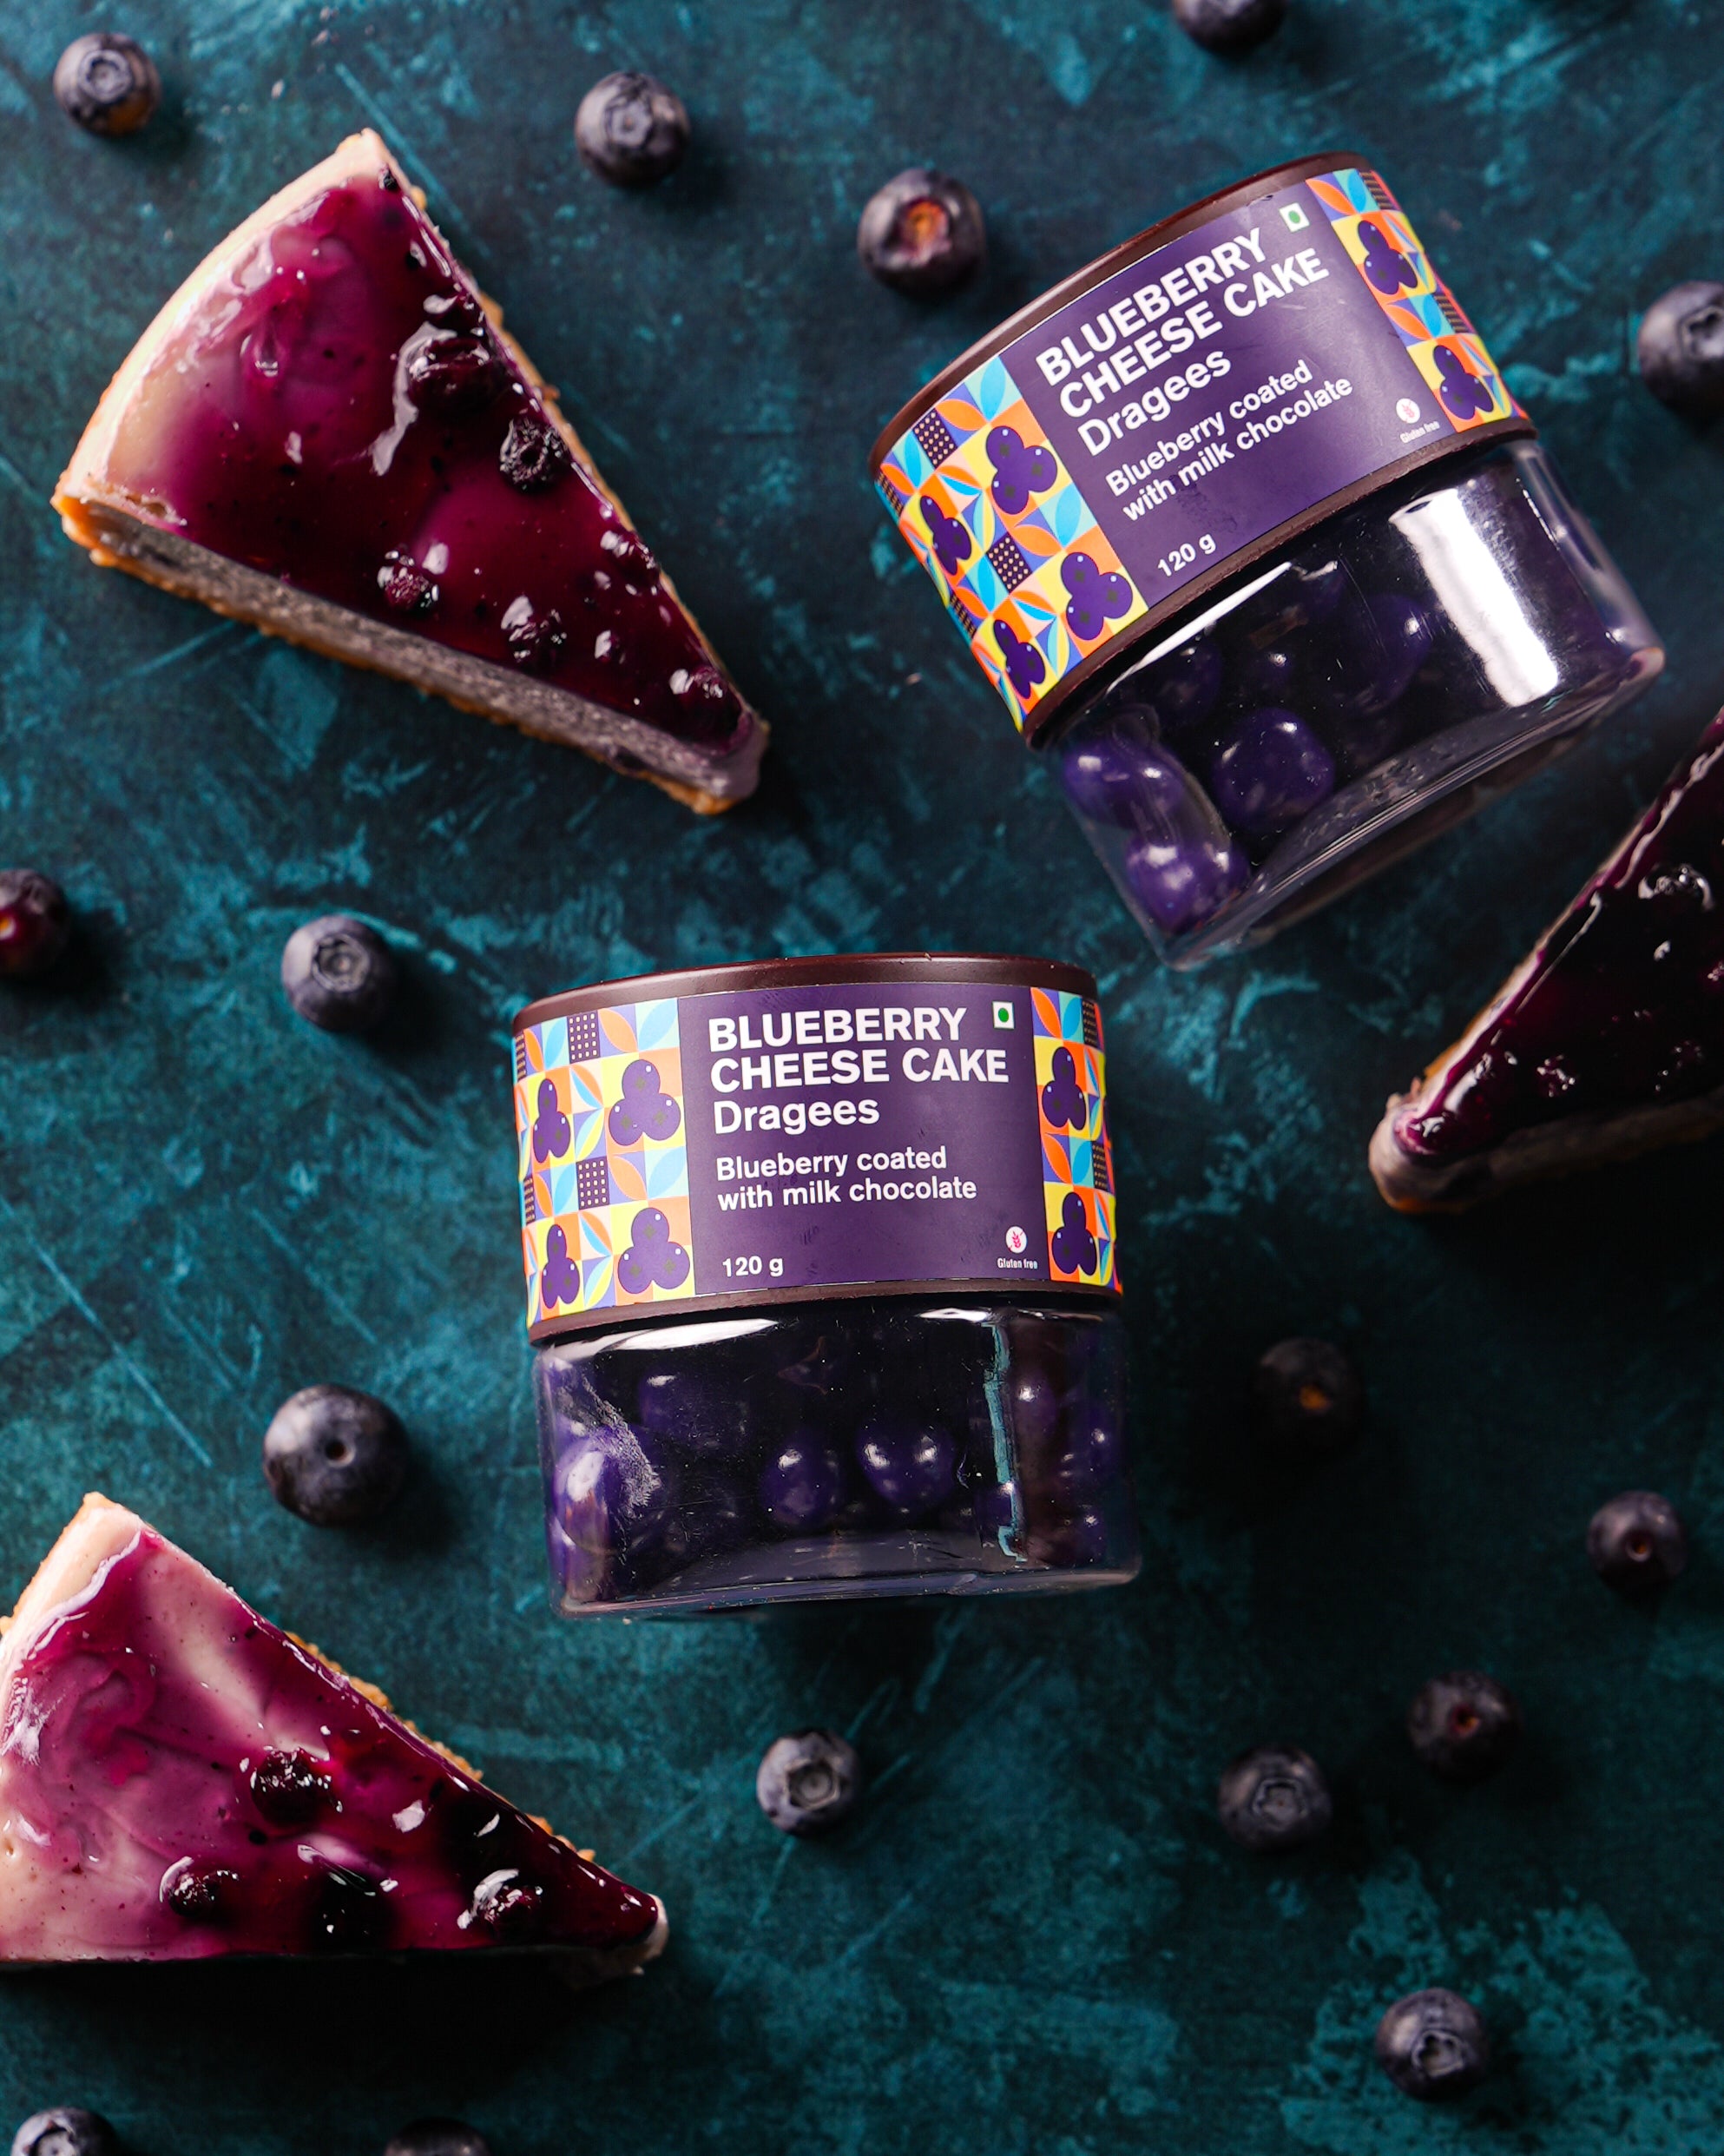 Entisi - Blueberry Cheesecake Dragees Jar